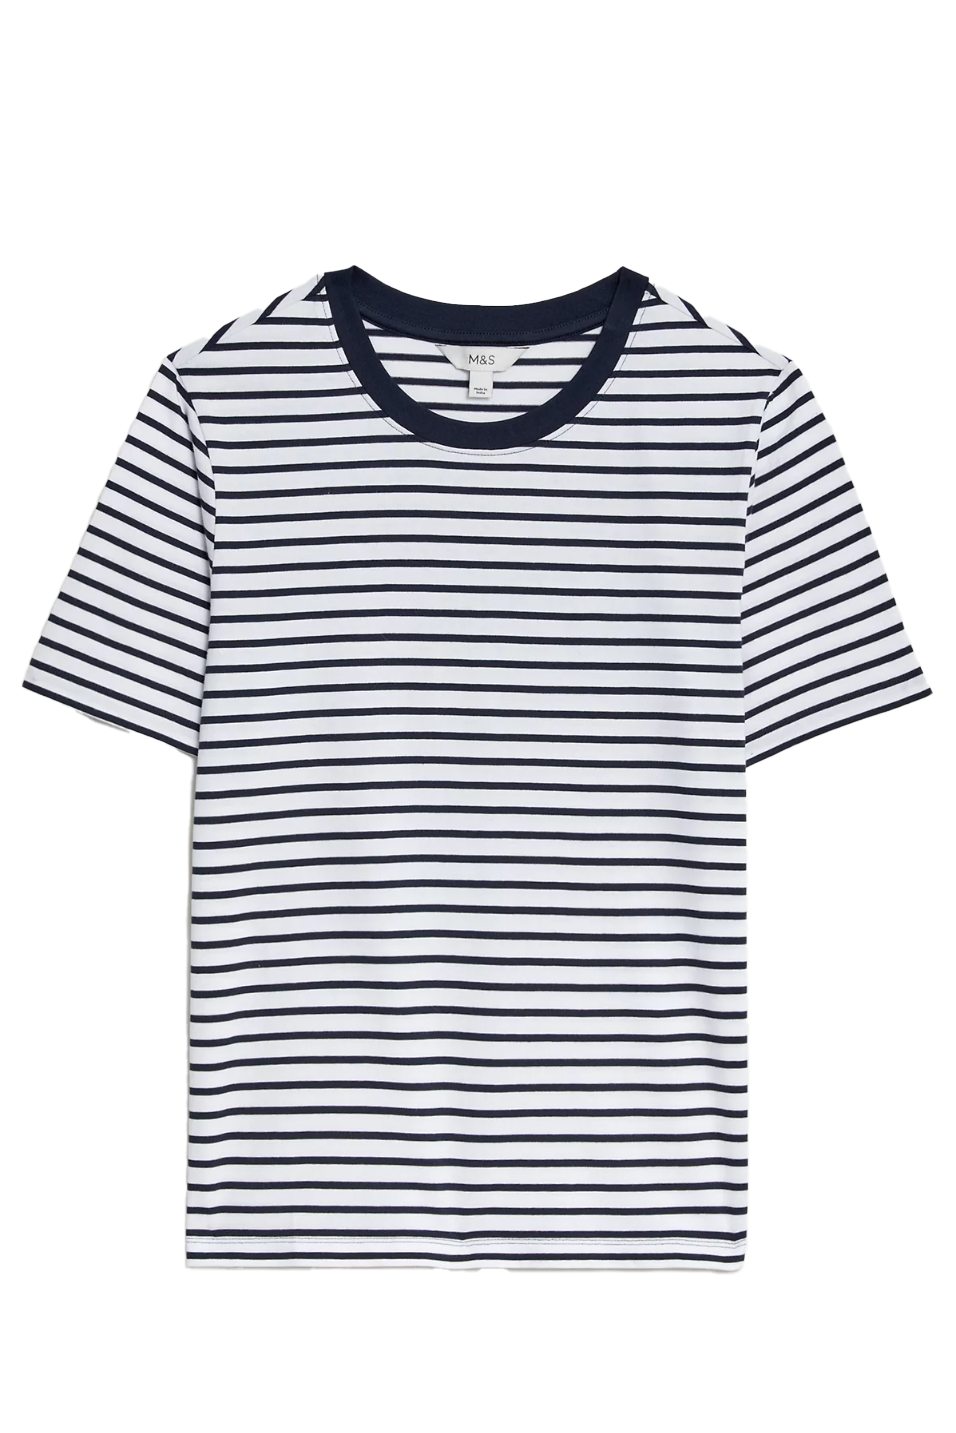 M&S Everyday Fit T-Shirt